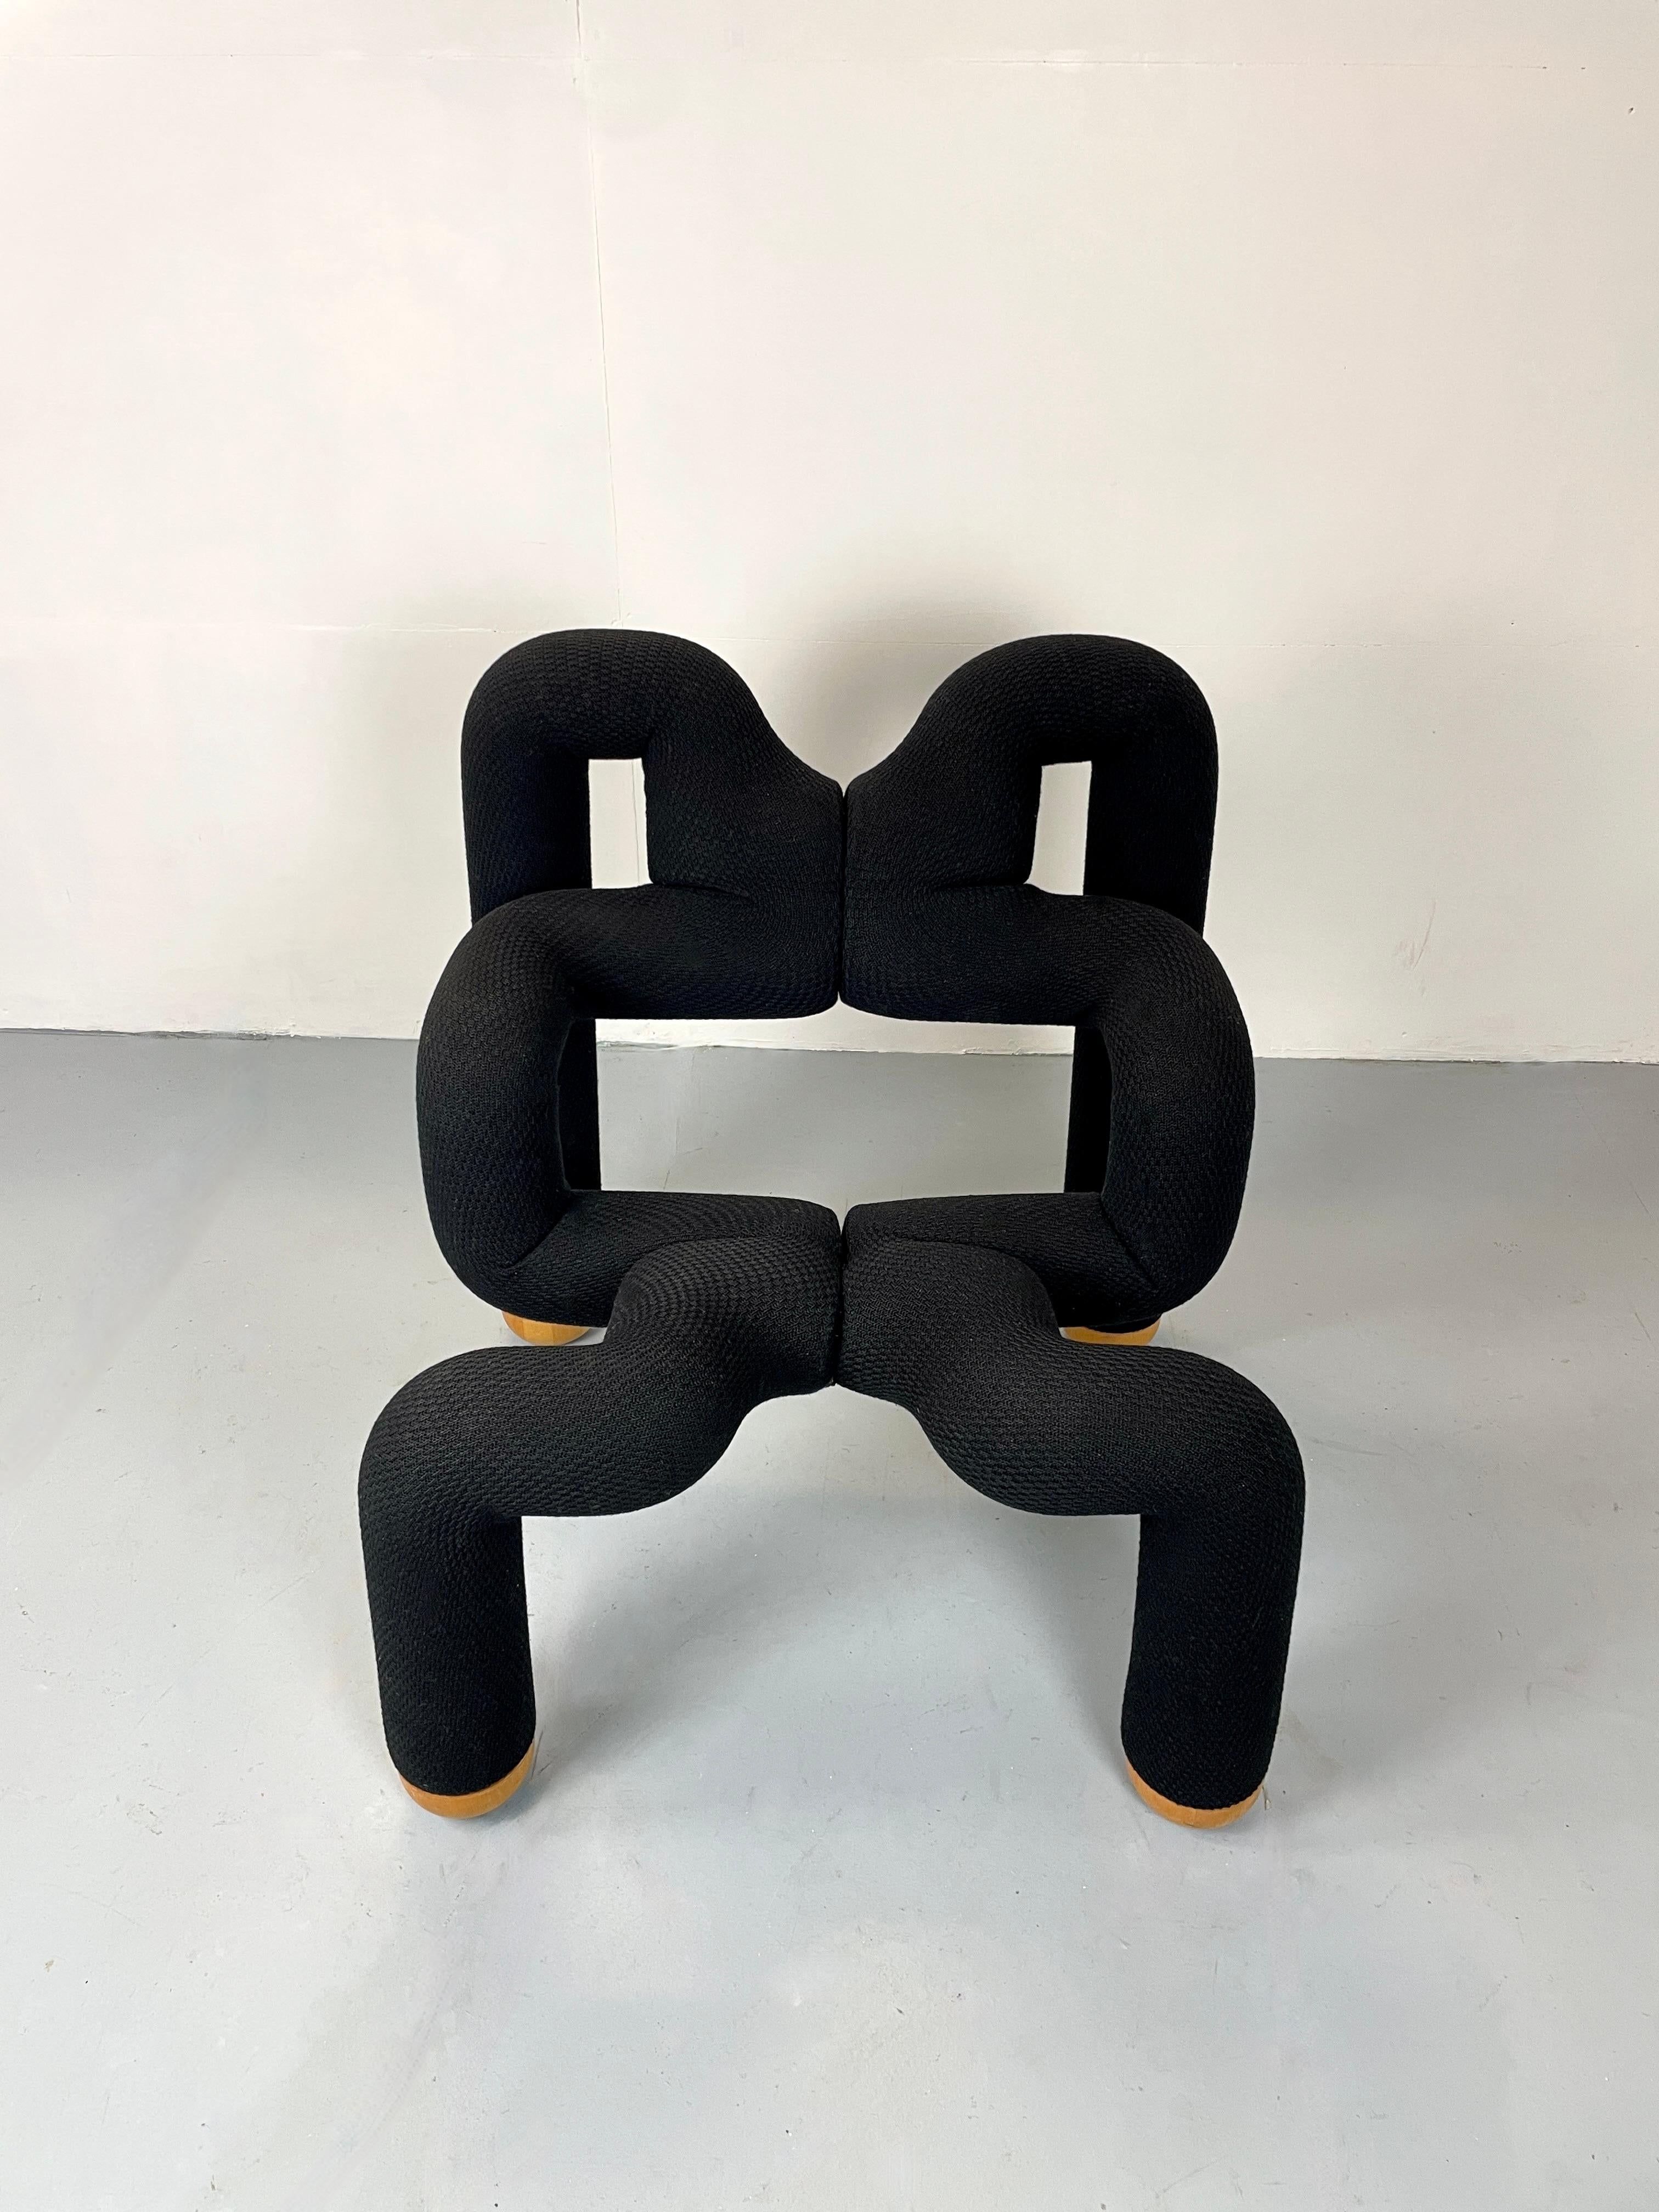 Iconic Ekstrem chair from Terje Ekstrom which was handcrafted in Norway. 
Ultra rare with the wooden riser for the chair.
The chair is still in his original upholstery. 

The color is black.